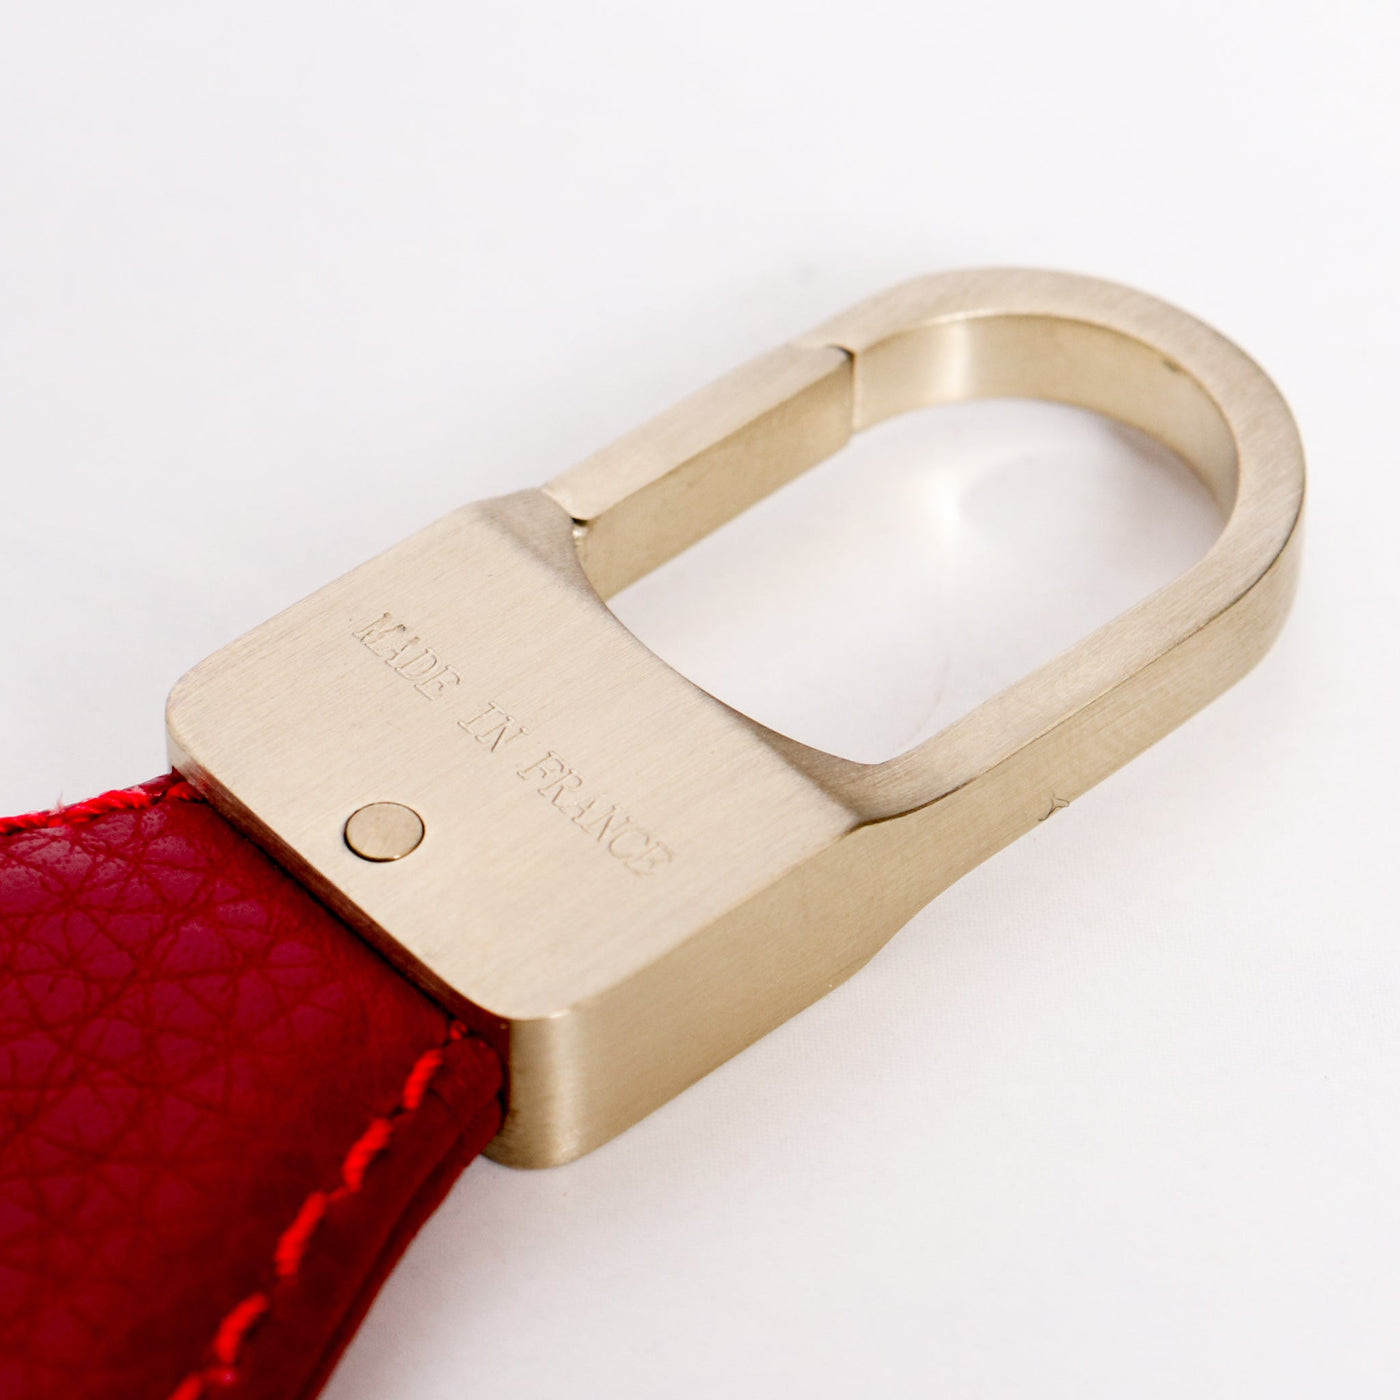 Montblanc Leather Goods Red Key Ring Preowned Made in France